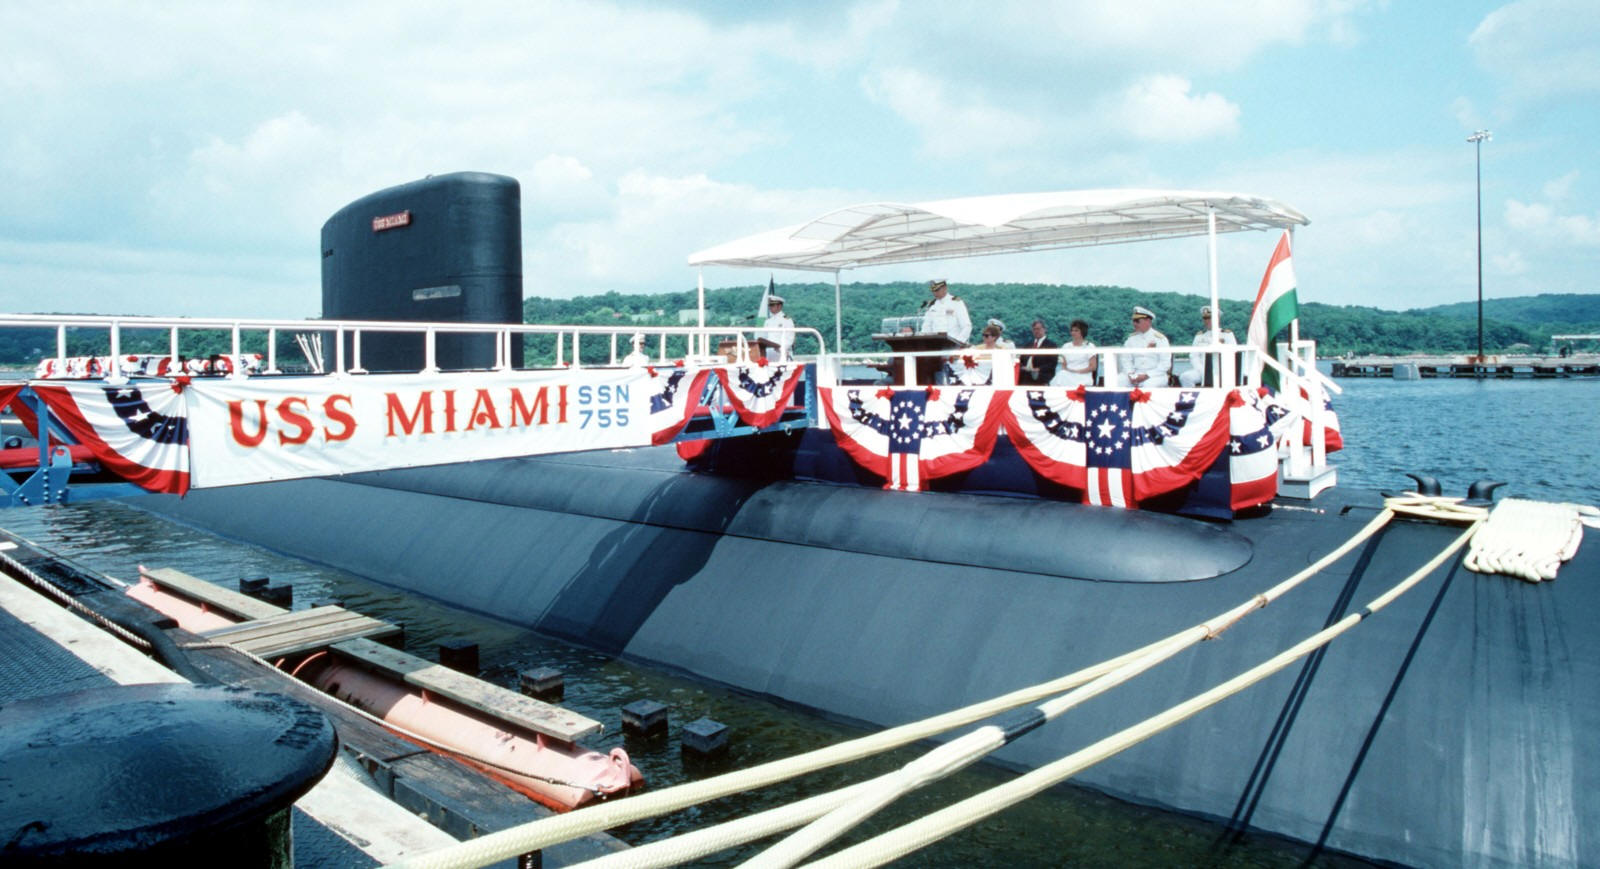 ssn-755 uss miami commissioning ceremony june 1990